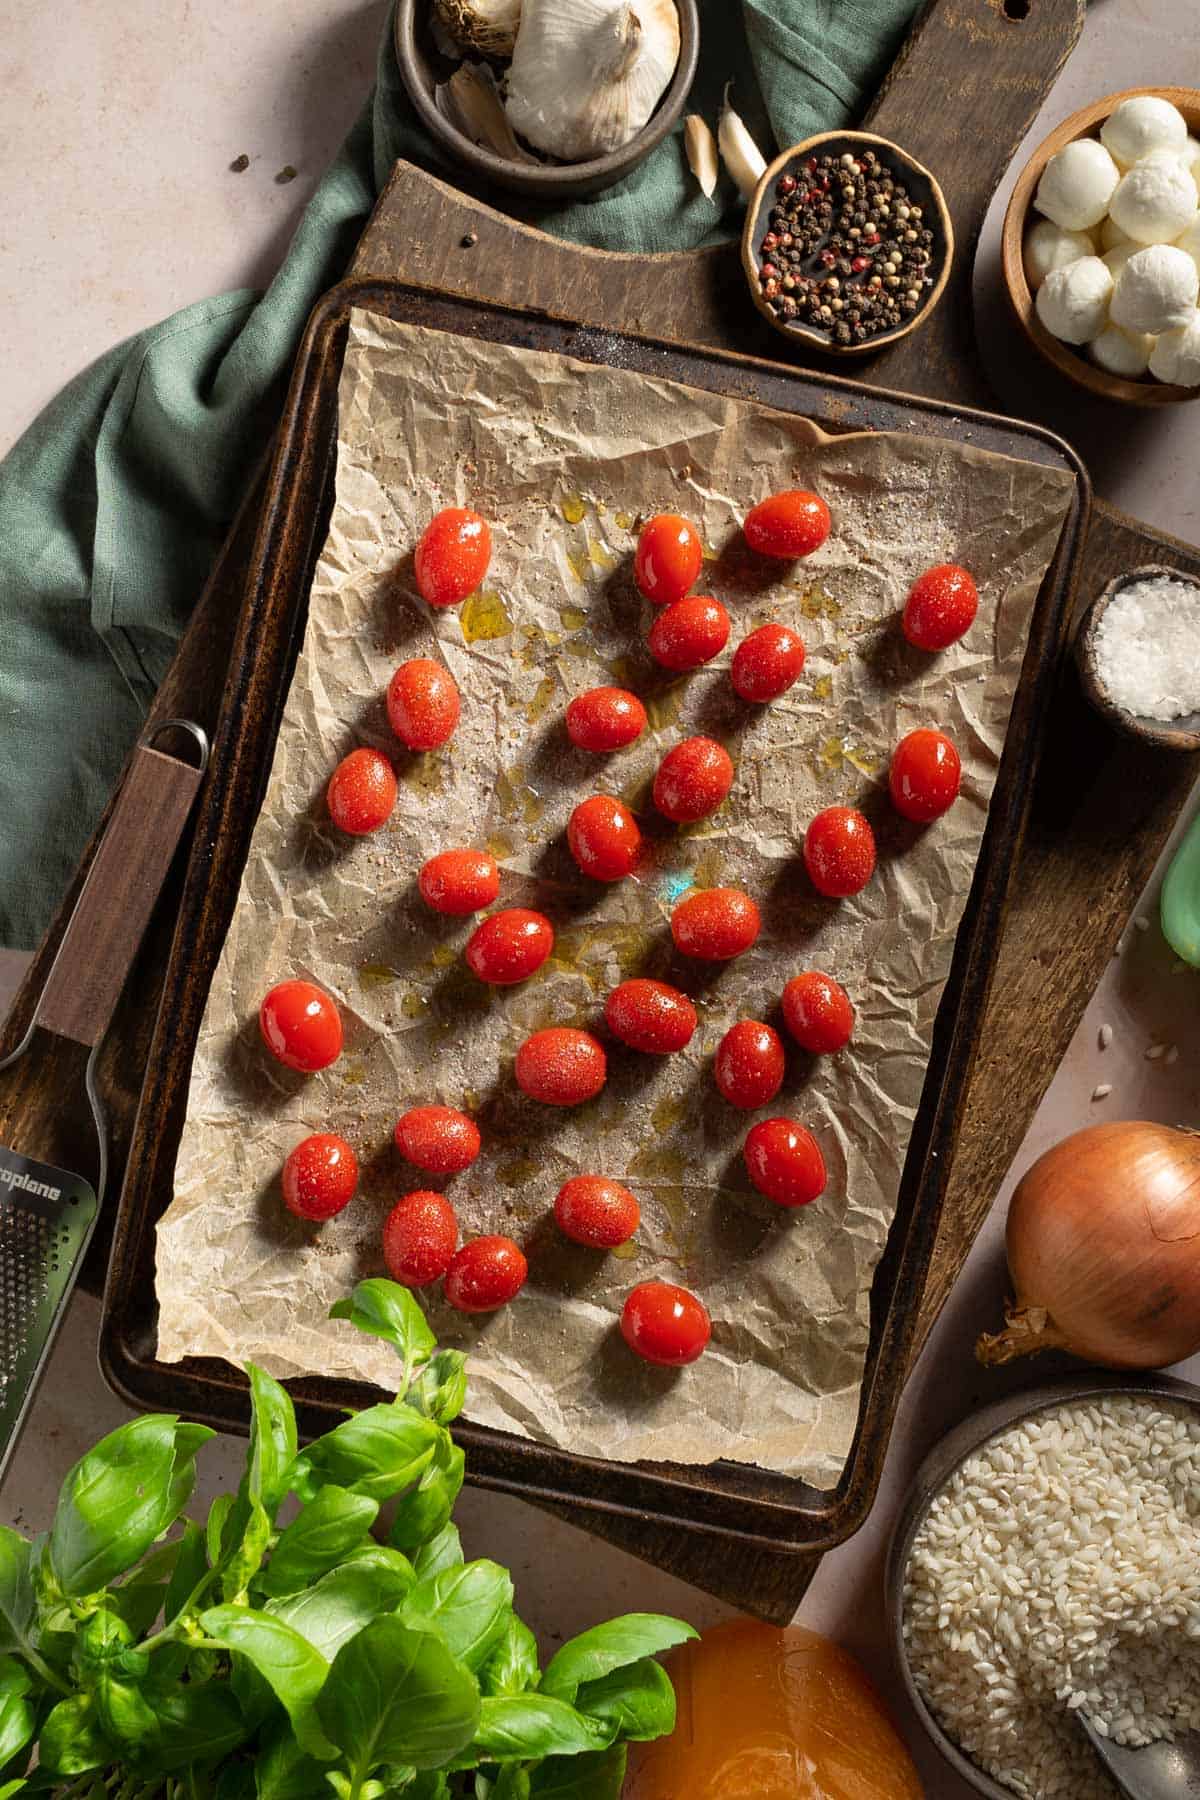 Tomatoes on a baking sheet before roasting.